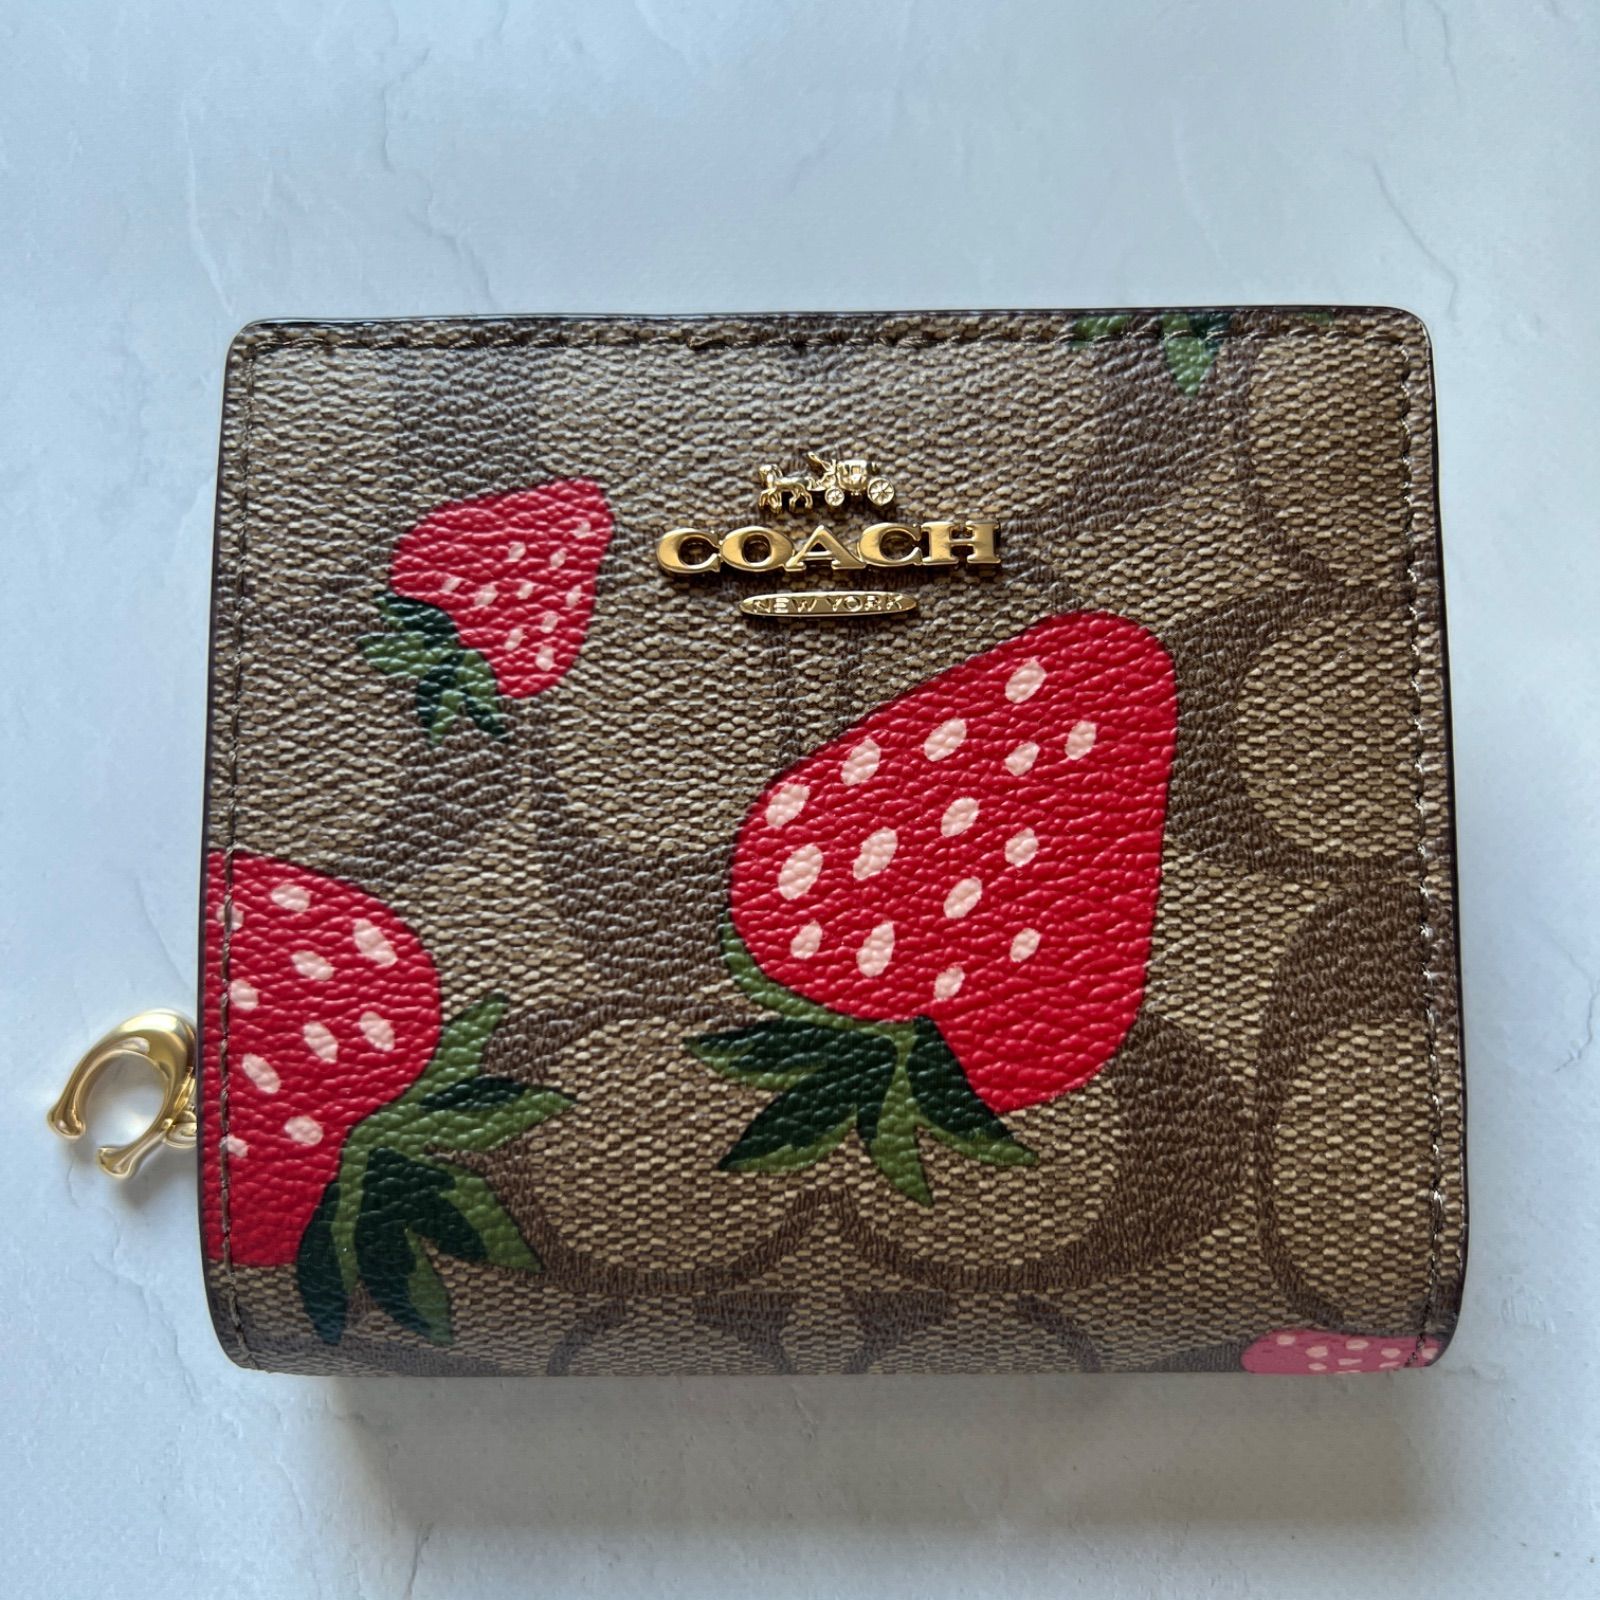 OUTLET 包装 即日発送 代引無料 COACH 新品 スナップ ウォレット